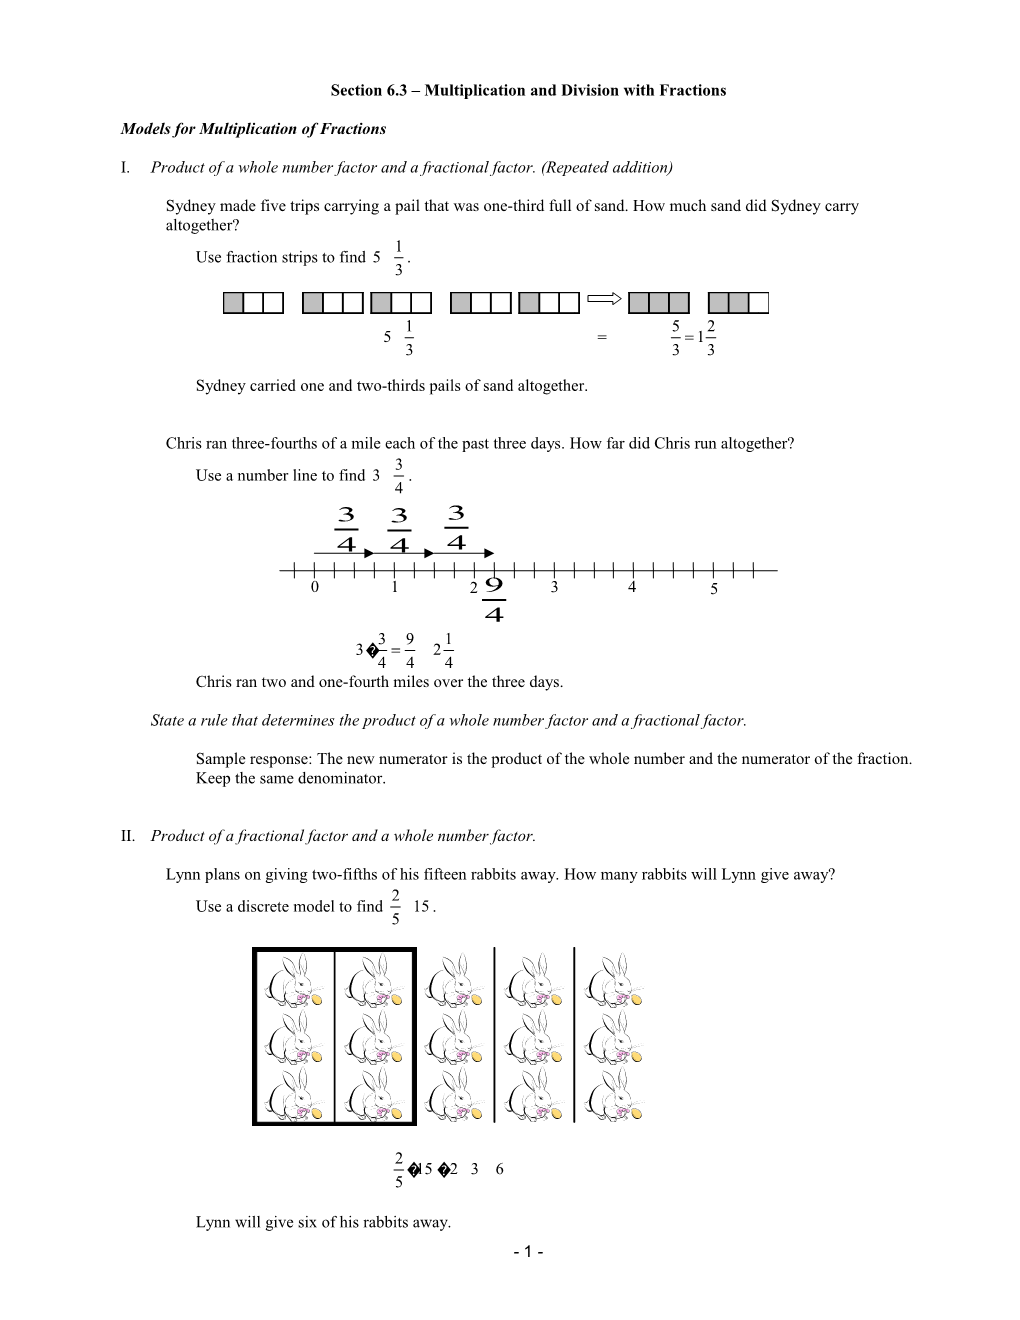 Section 6.3 Multiplication and Division with Fractions